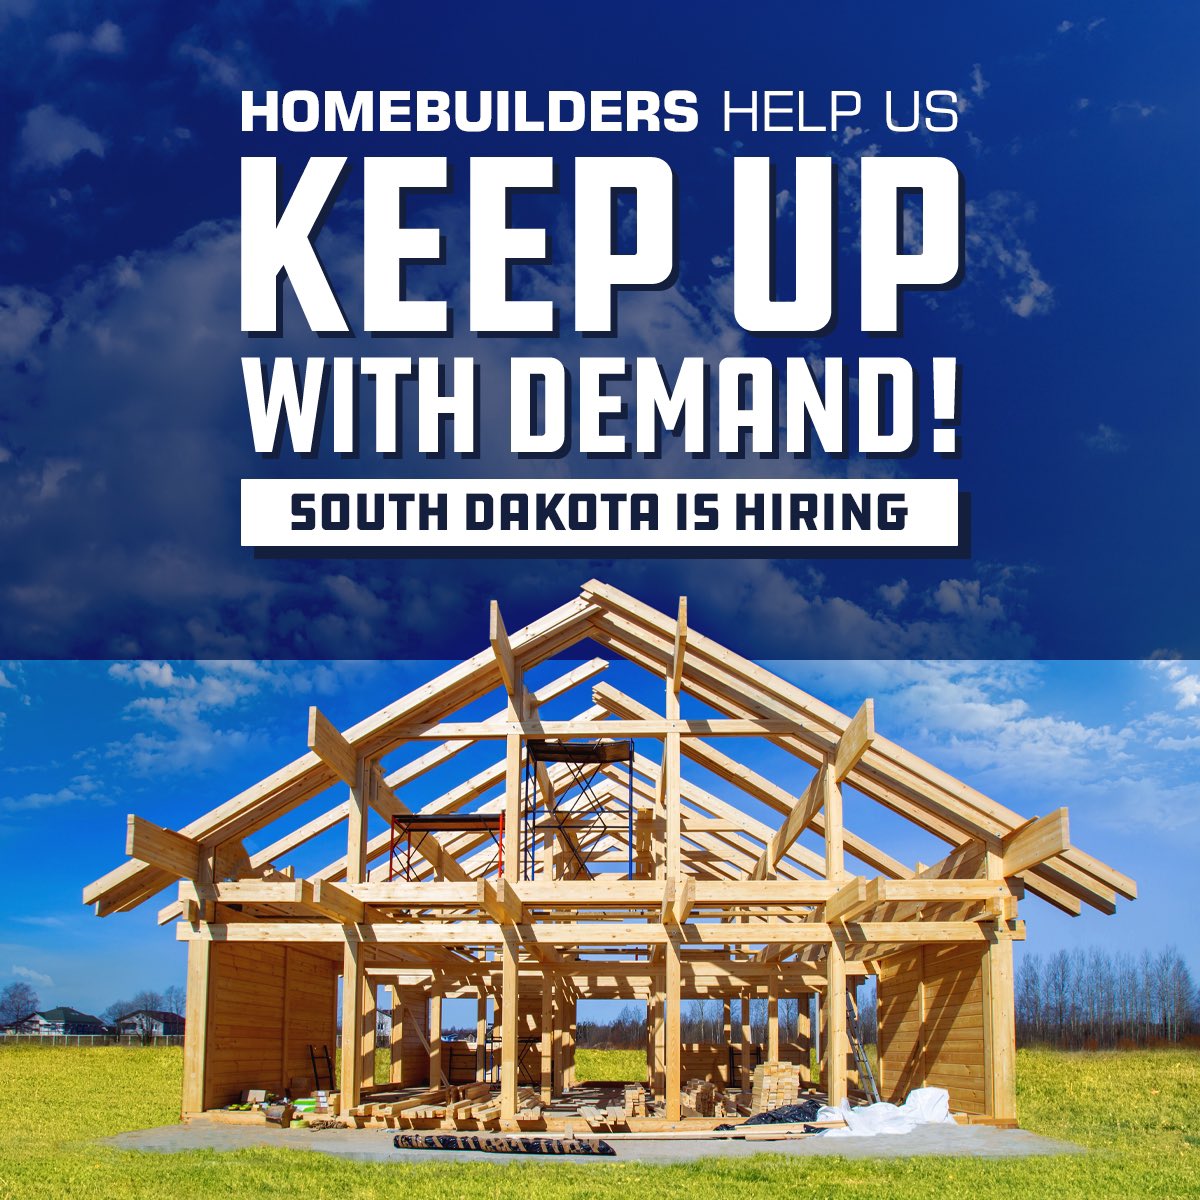 South Dakota has led the nation for new homes built – but we still need more builders to keep up with demand! Get to work in the Freest state in the nation! FreedomWorksHere.com